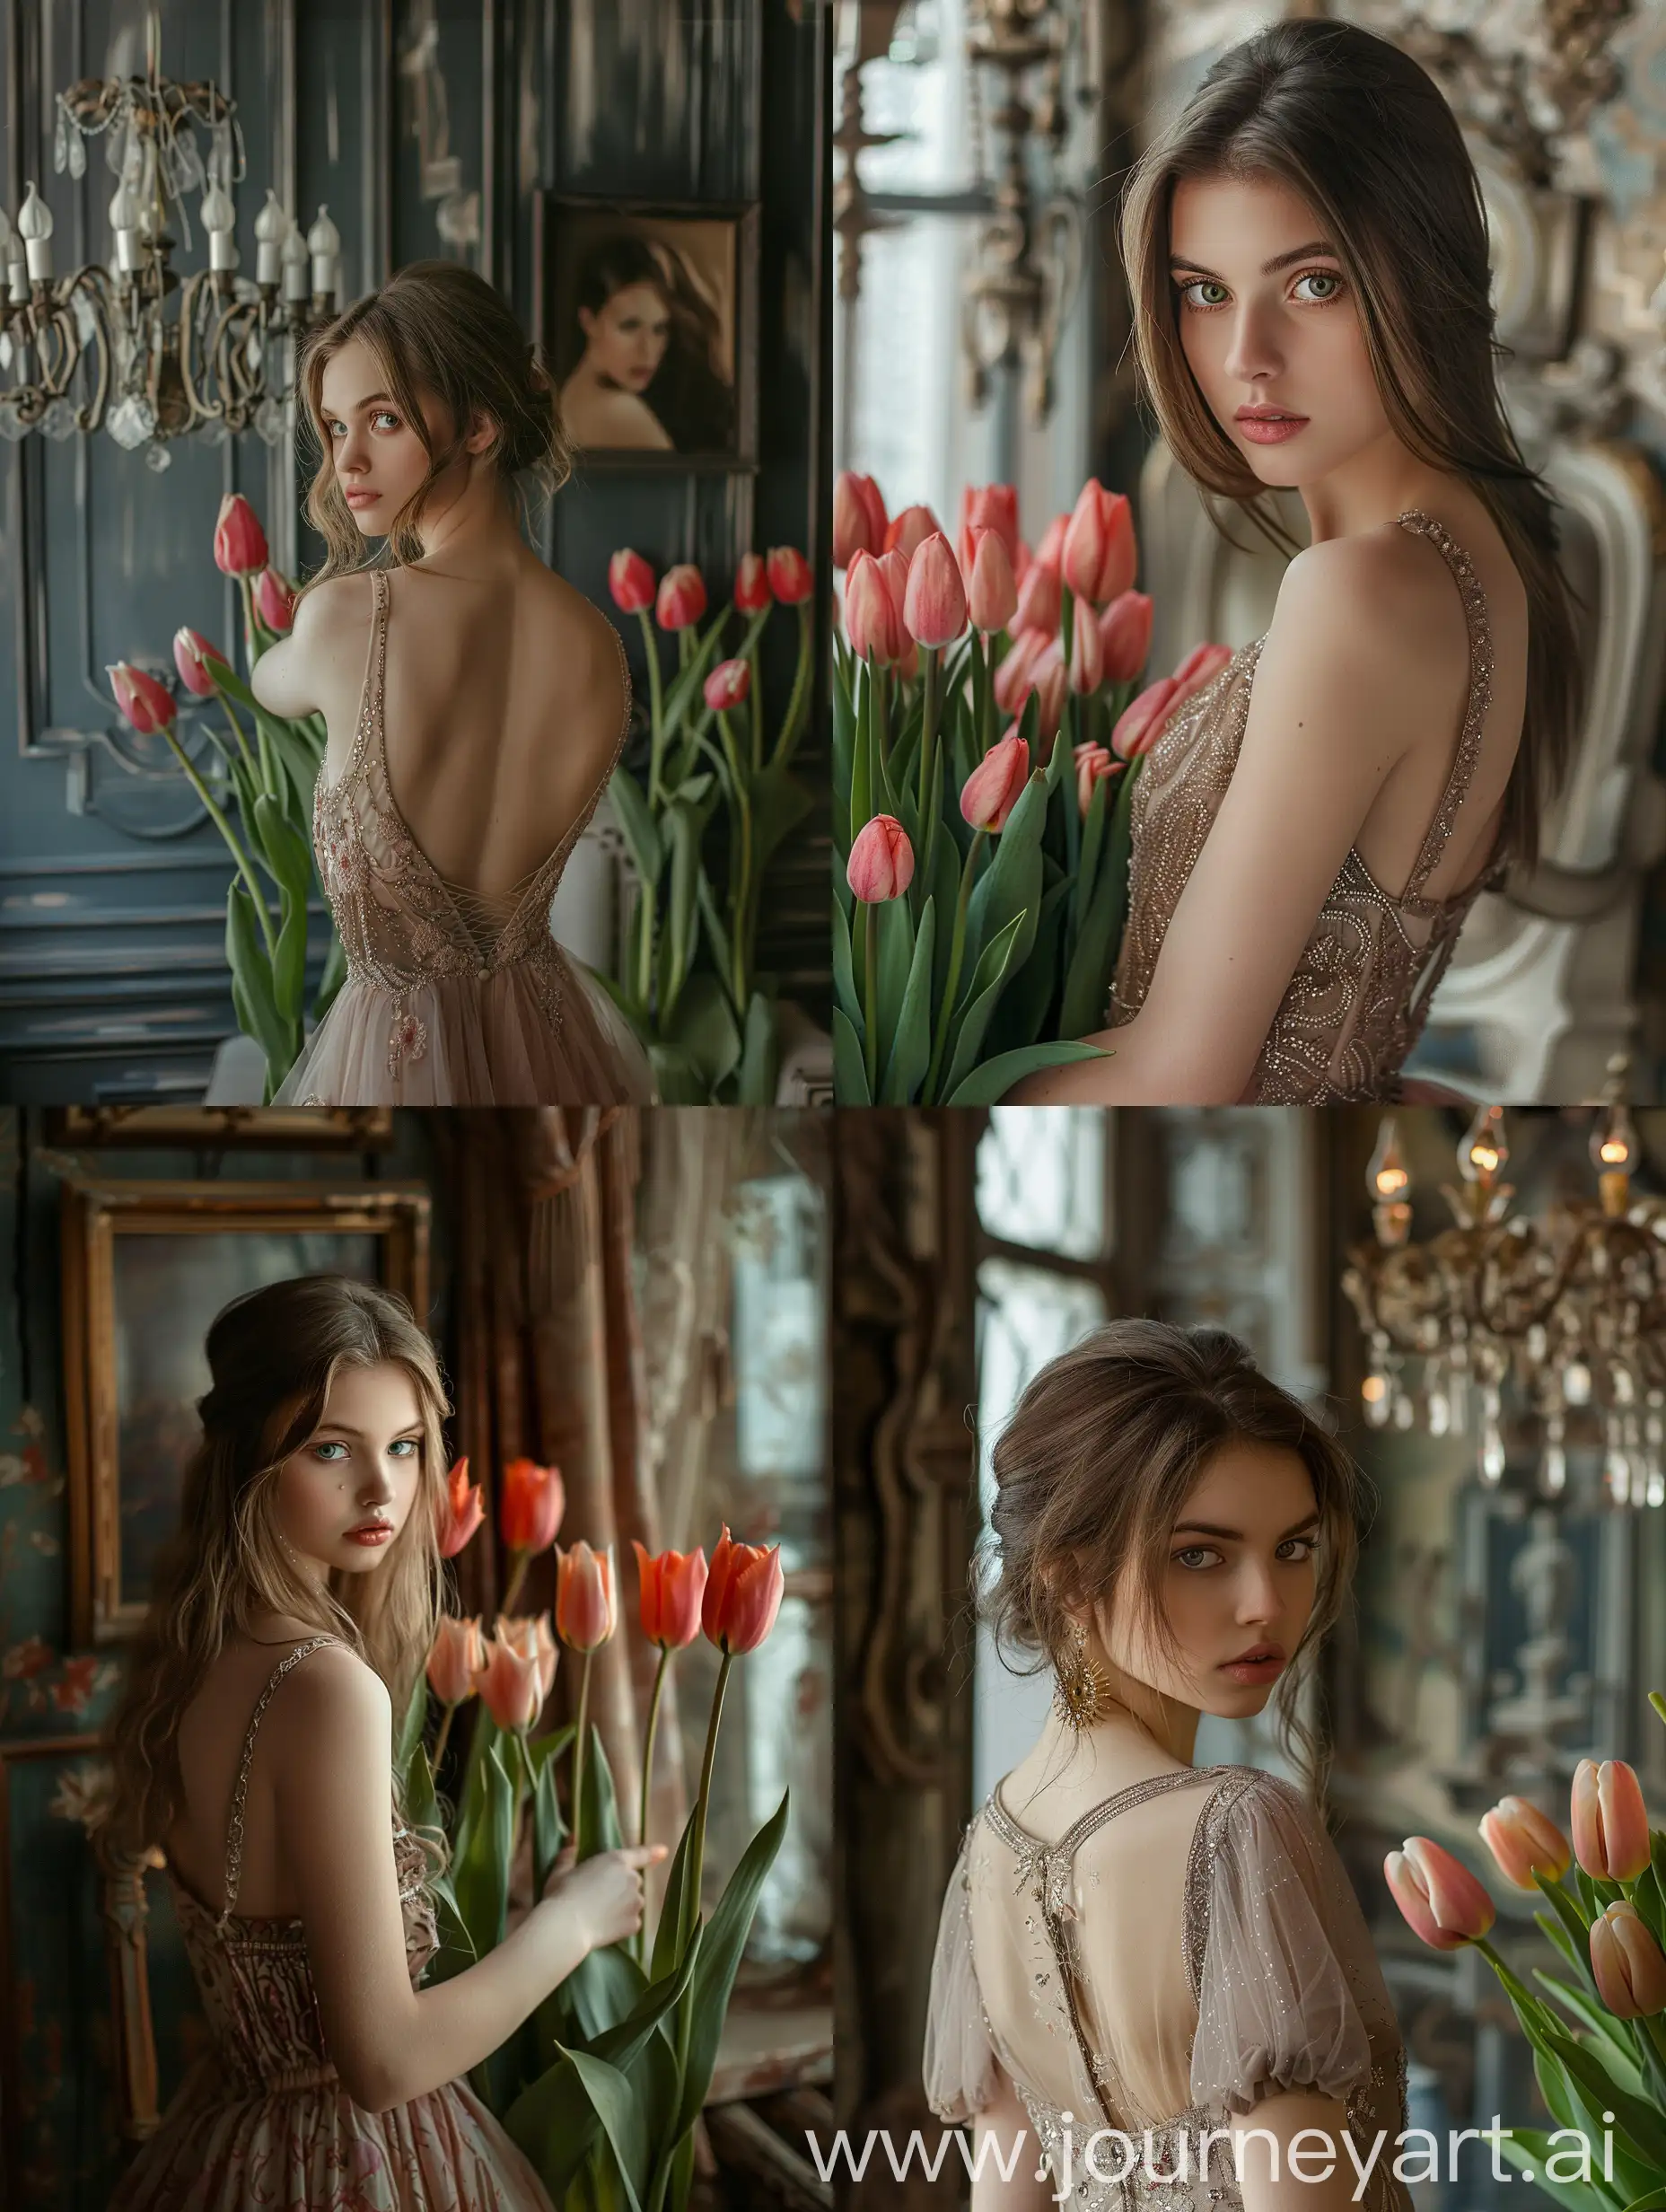 Photo shoot beautiful interior,Girl with tulips in a dress looking in front of her realistix